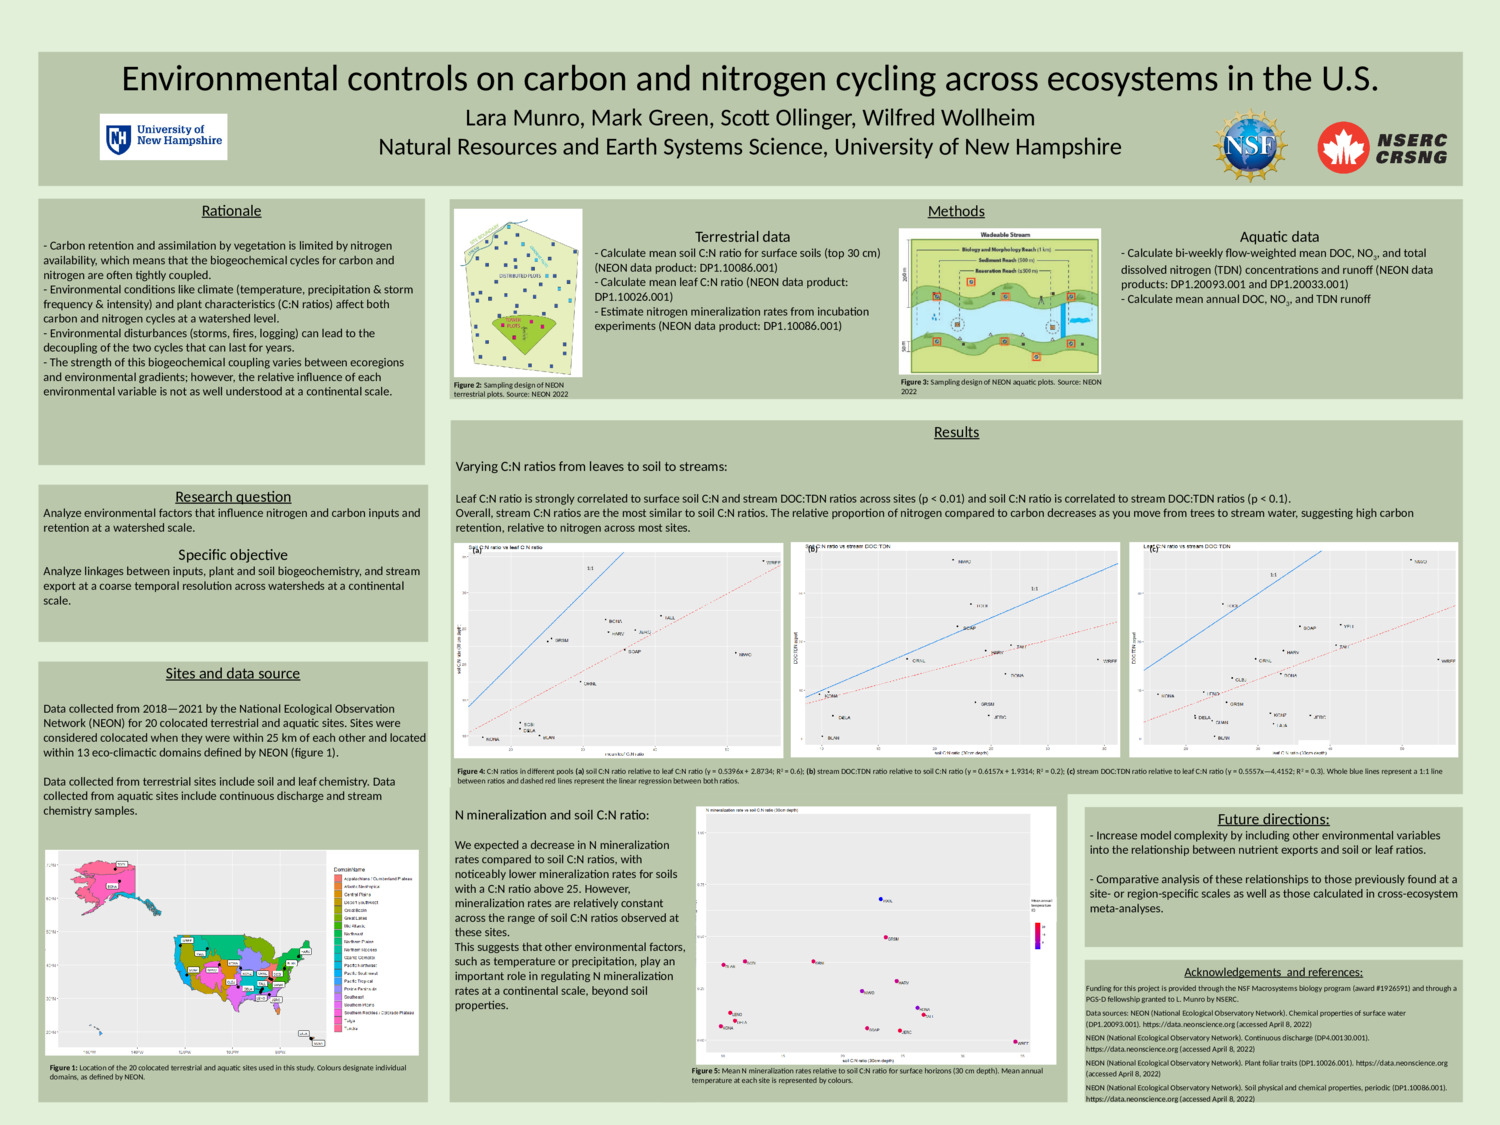 Environmental Controls On Carbon And Nitrogen Cycling Across Ecosystems In The U.S. by lm1223